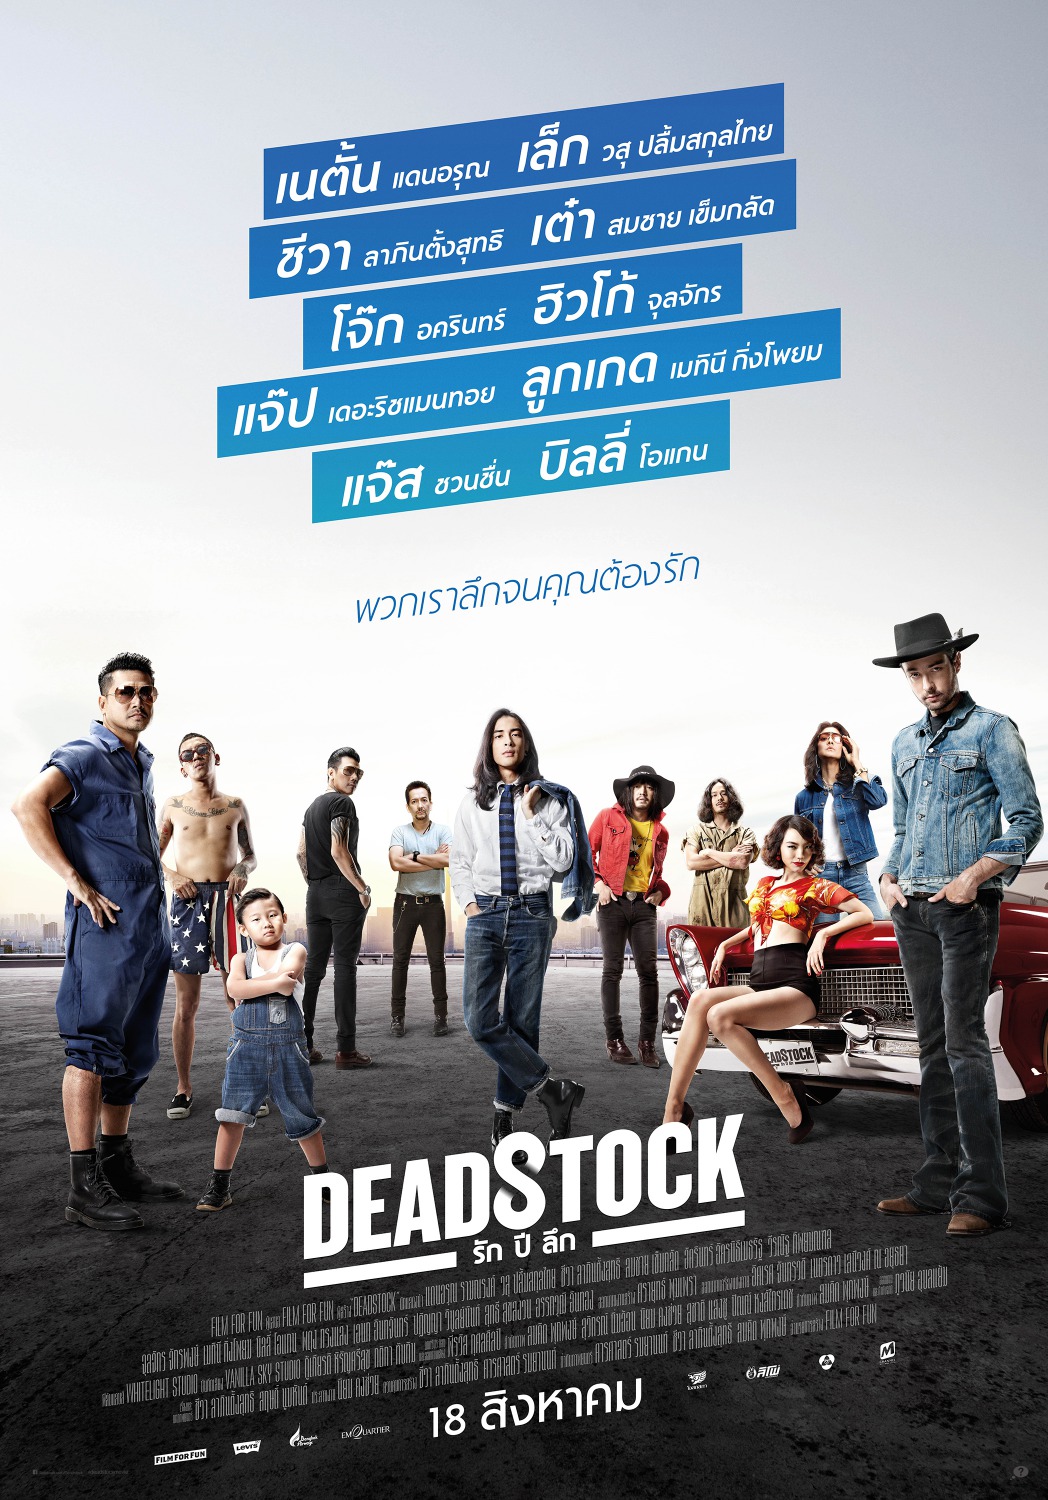 Extra Large Movie Poster Image for Deadstock (#11 of 11)